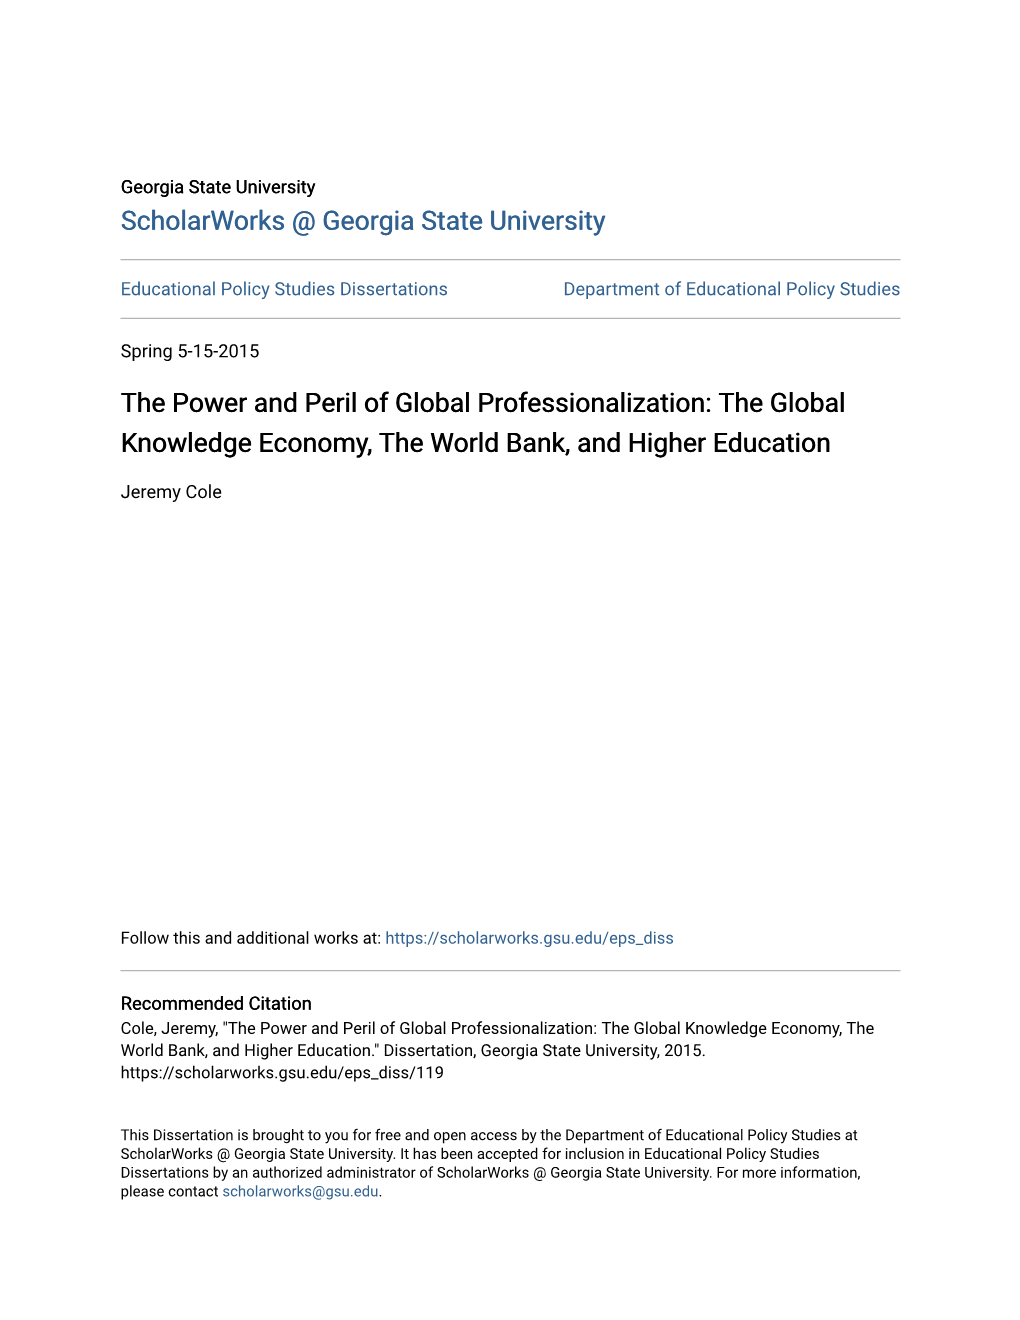 The Global Knowledge Economy, the World Bank, and Higher Education